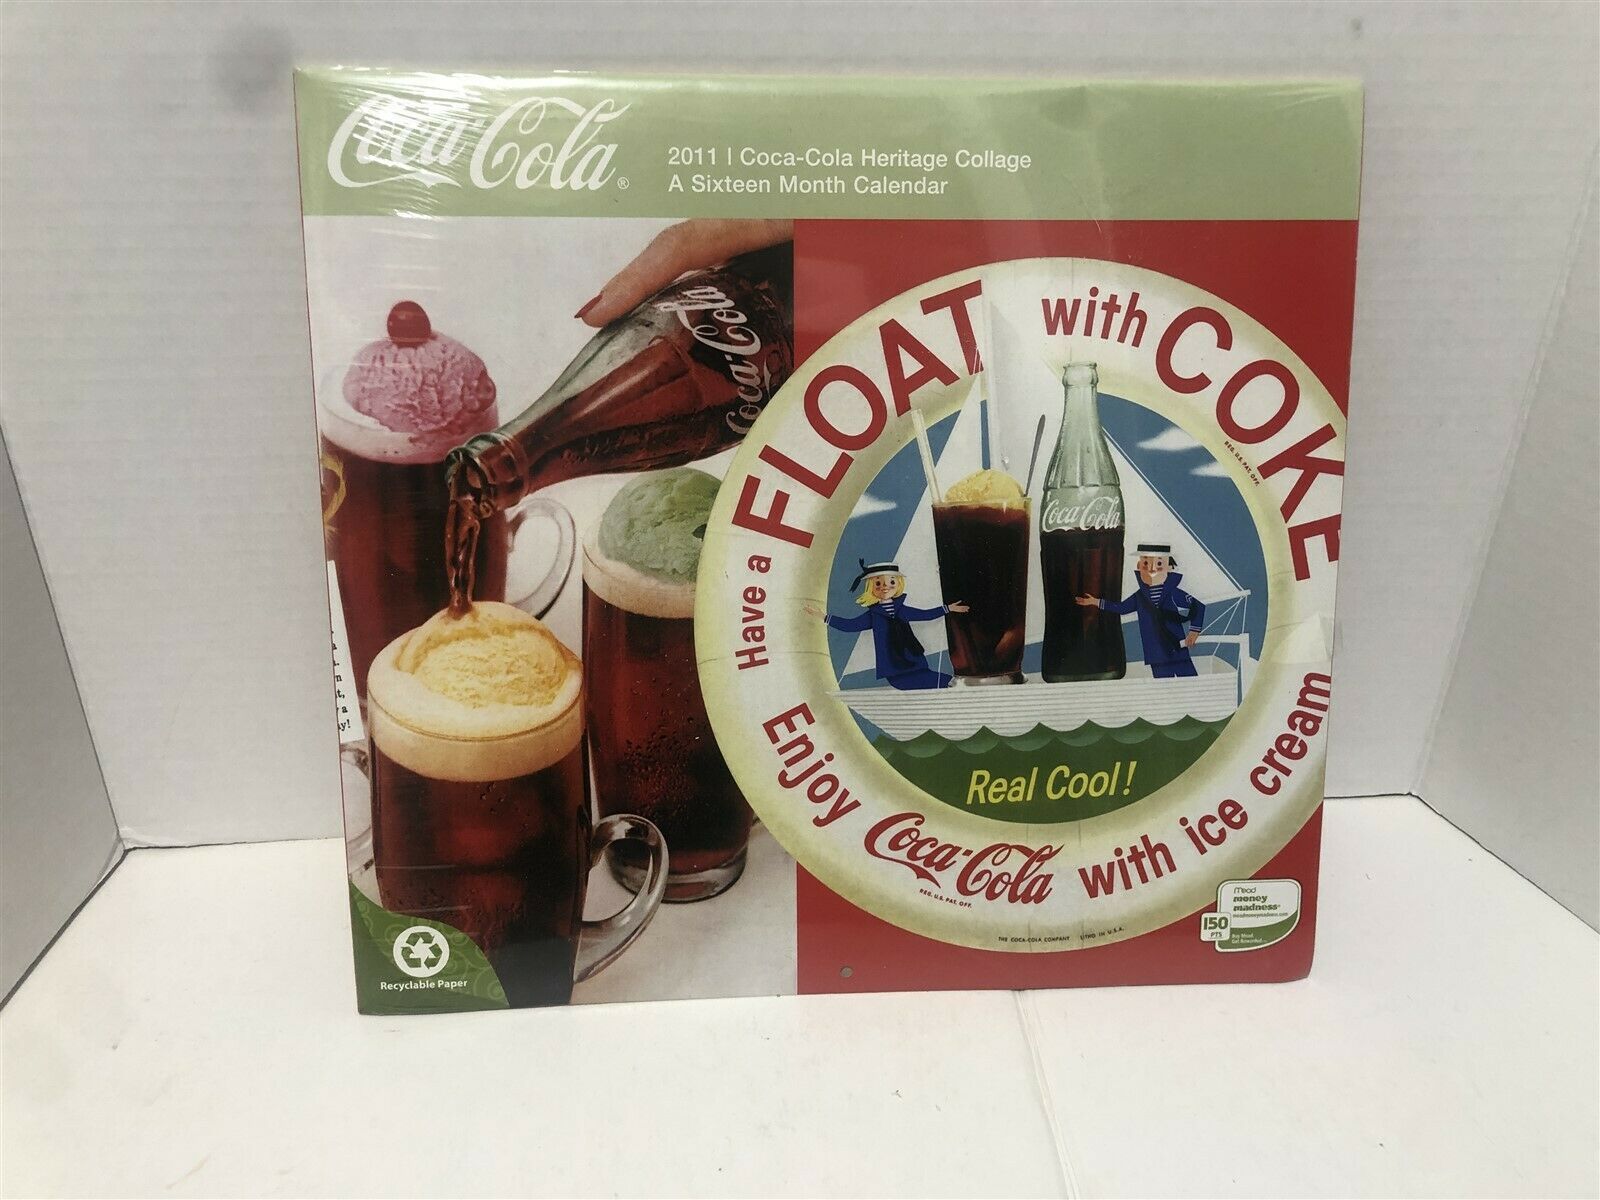 New 2011 Coca-Cola Heritage Collage 16 Month Calendar - Sealed - $8.79